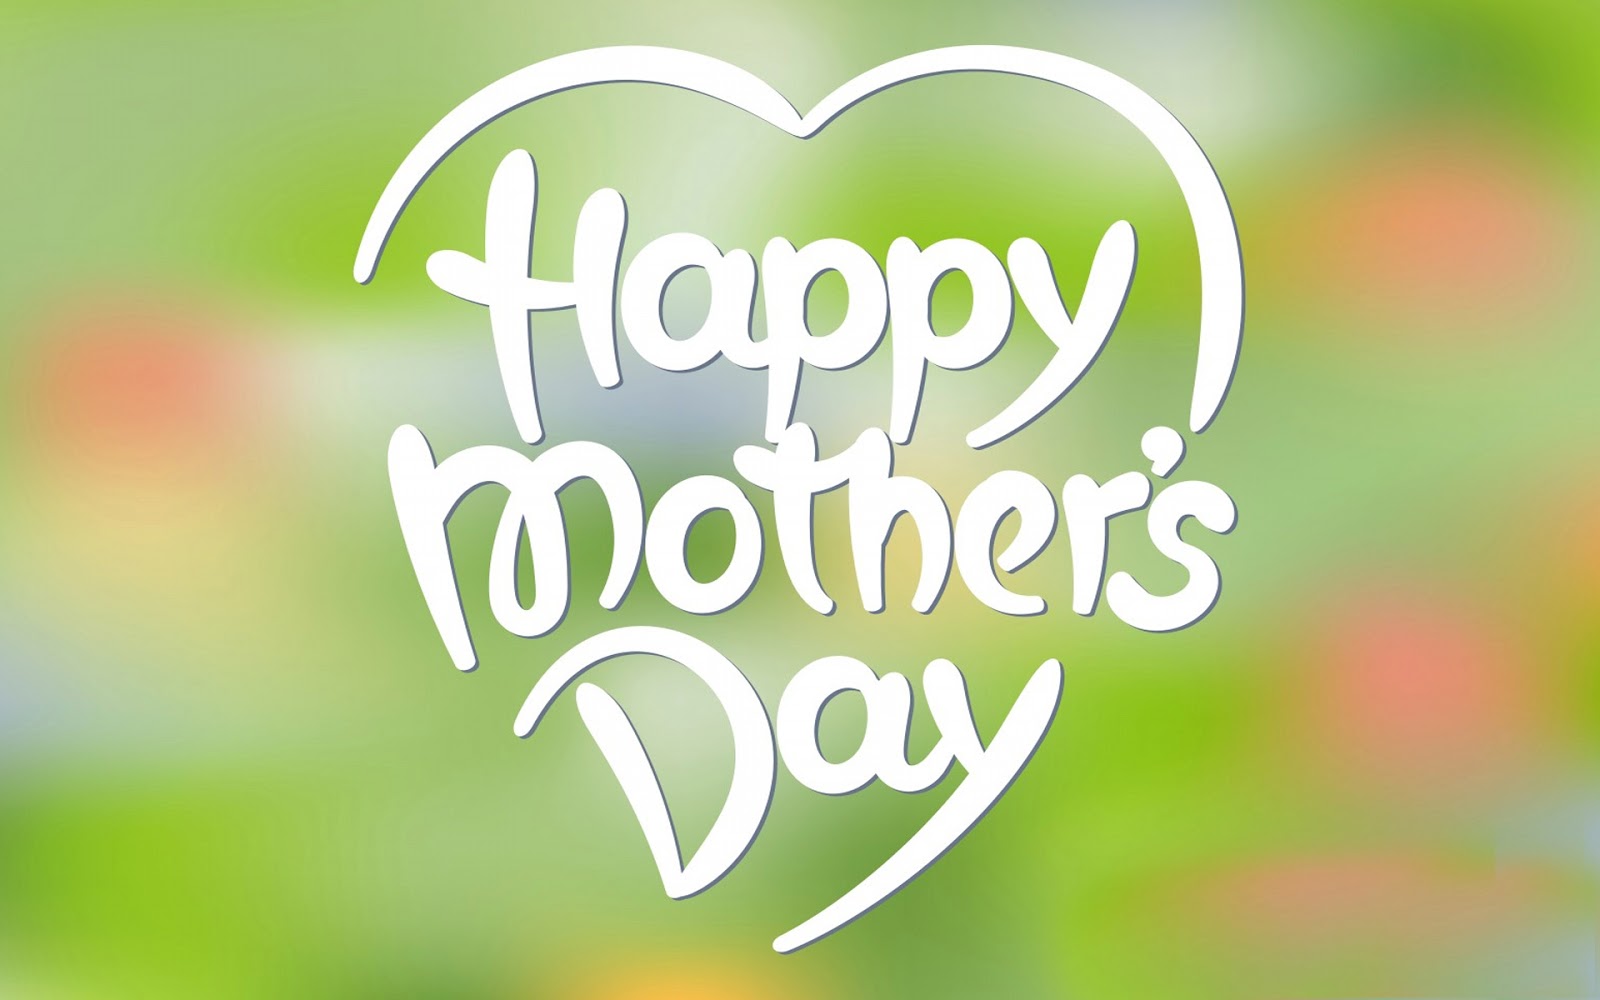 Beautiful] Happy Mothers Day 2022 Images, Wallpapers, Pictures, HD Photos,  Pics FREE Download